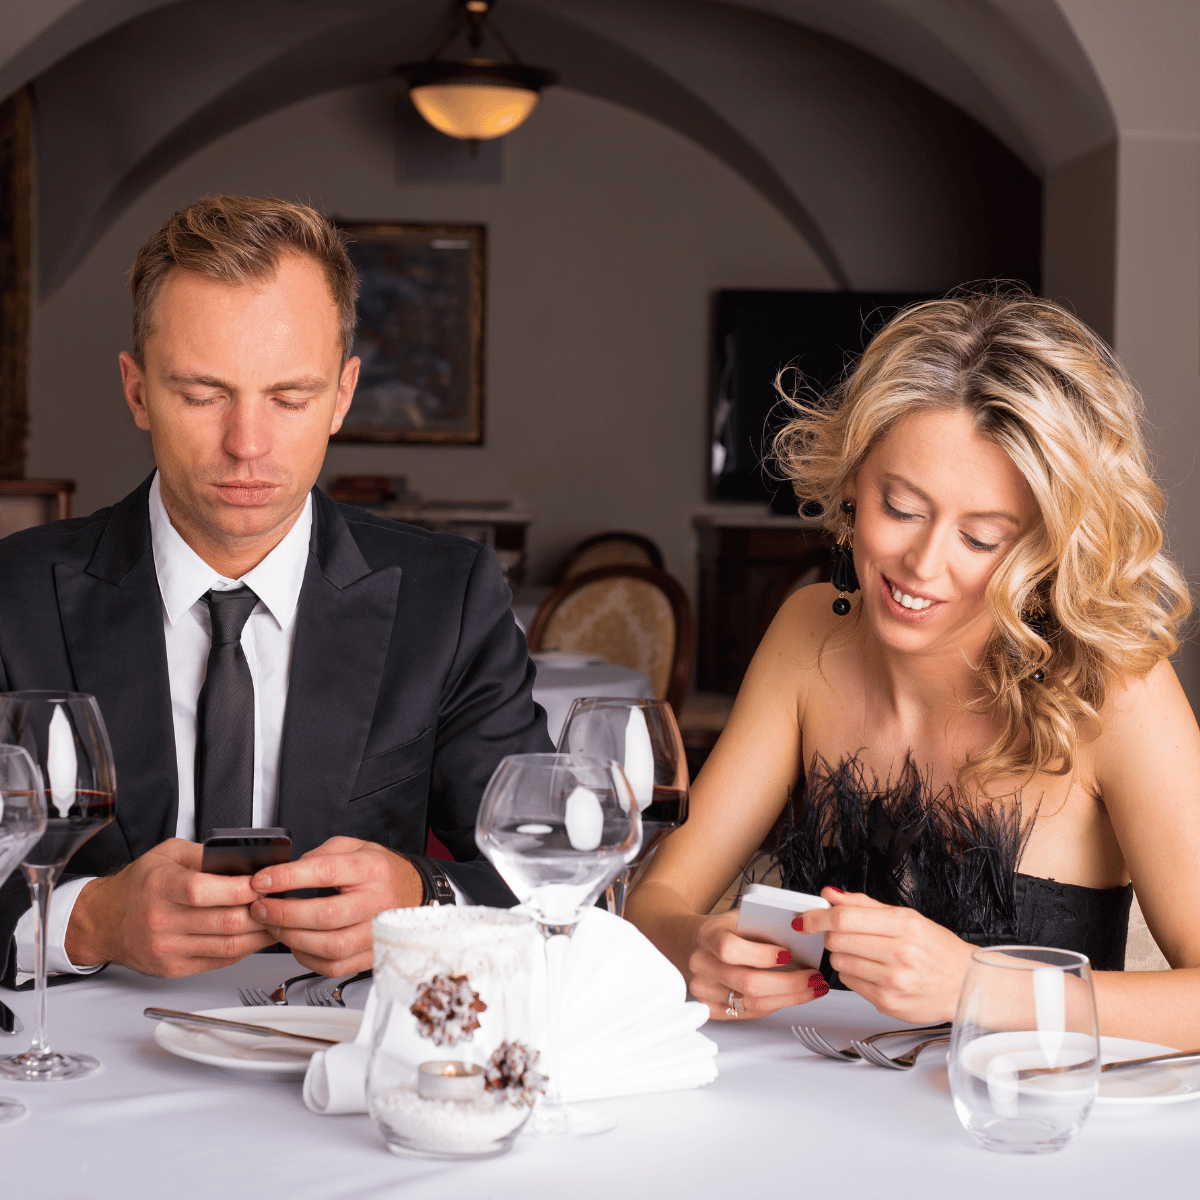 Man bored on phone during date with woman - Featured in: How Scorpio man acts when he lost interest